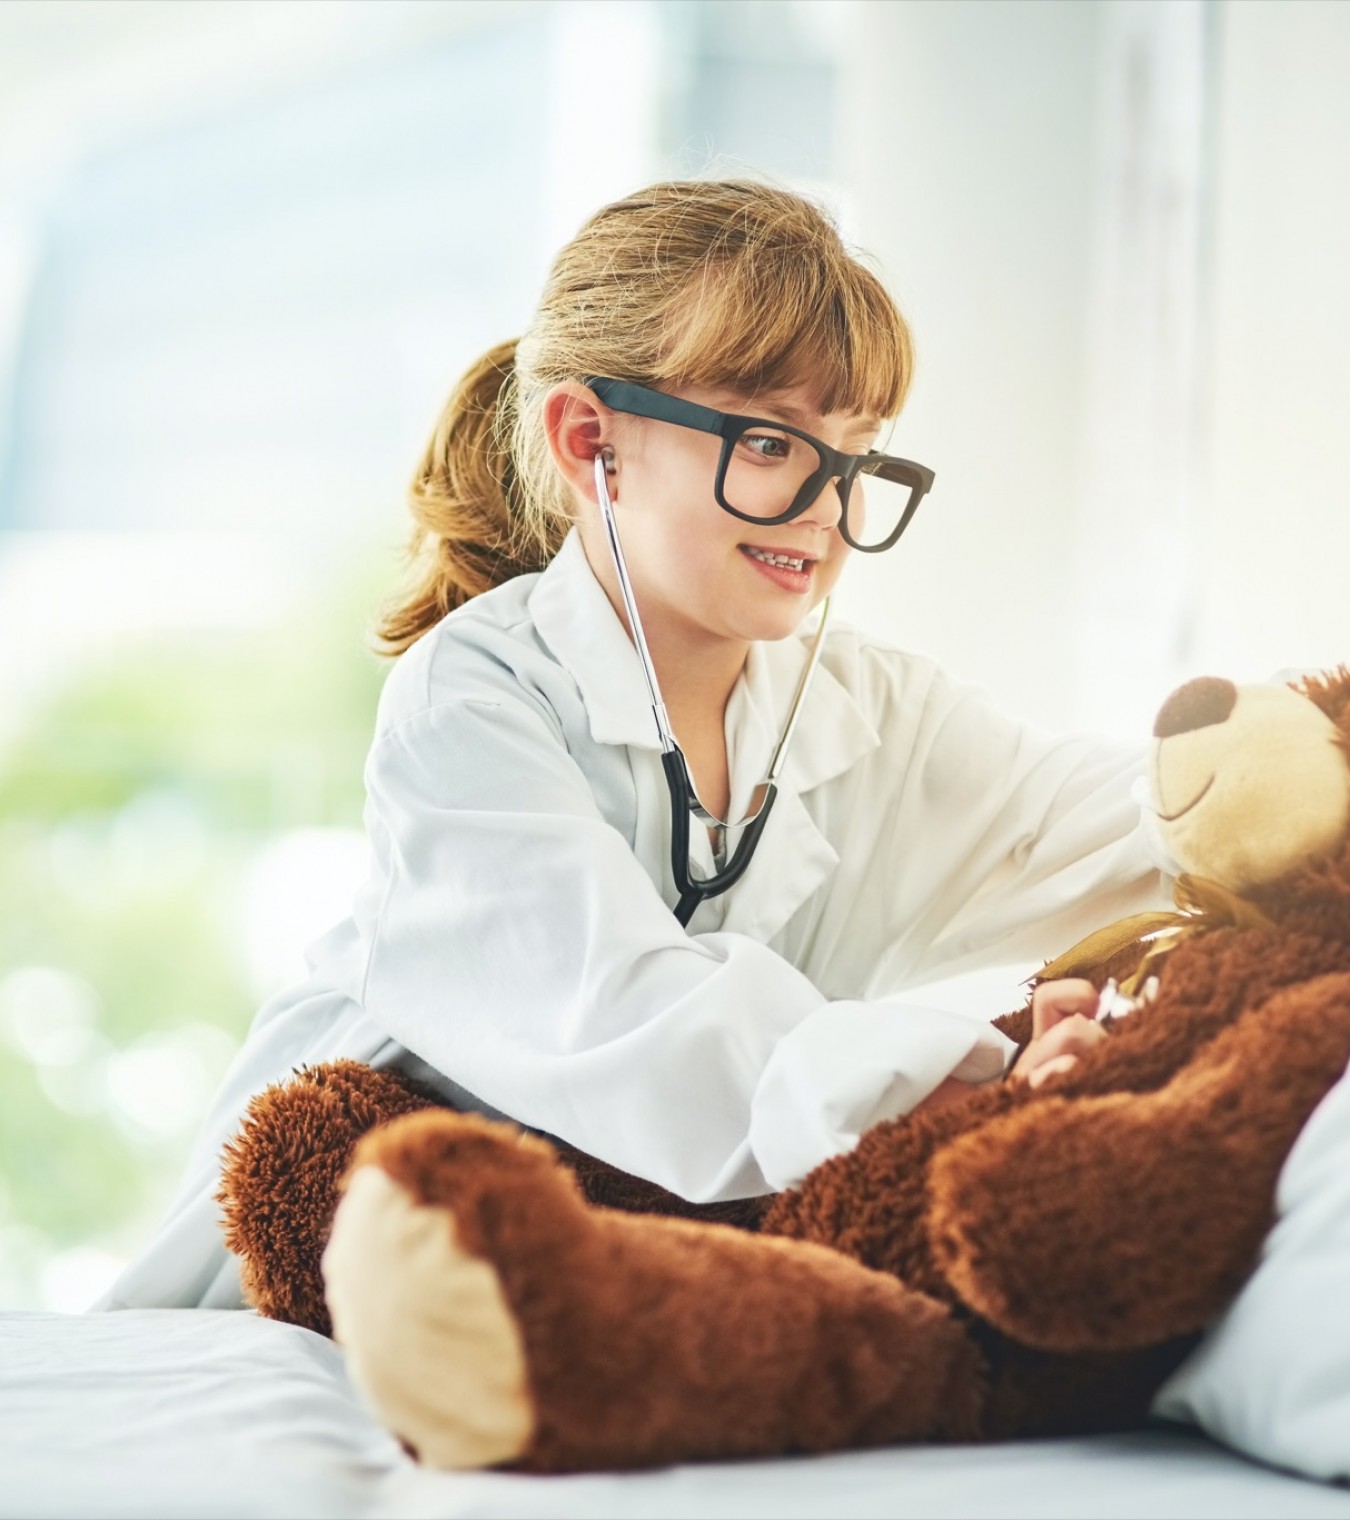 Five reasons your child should learn first aid